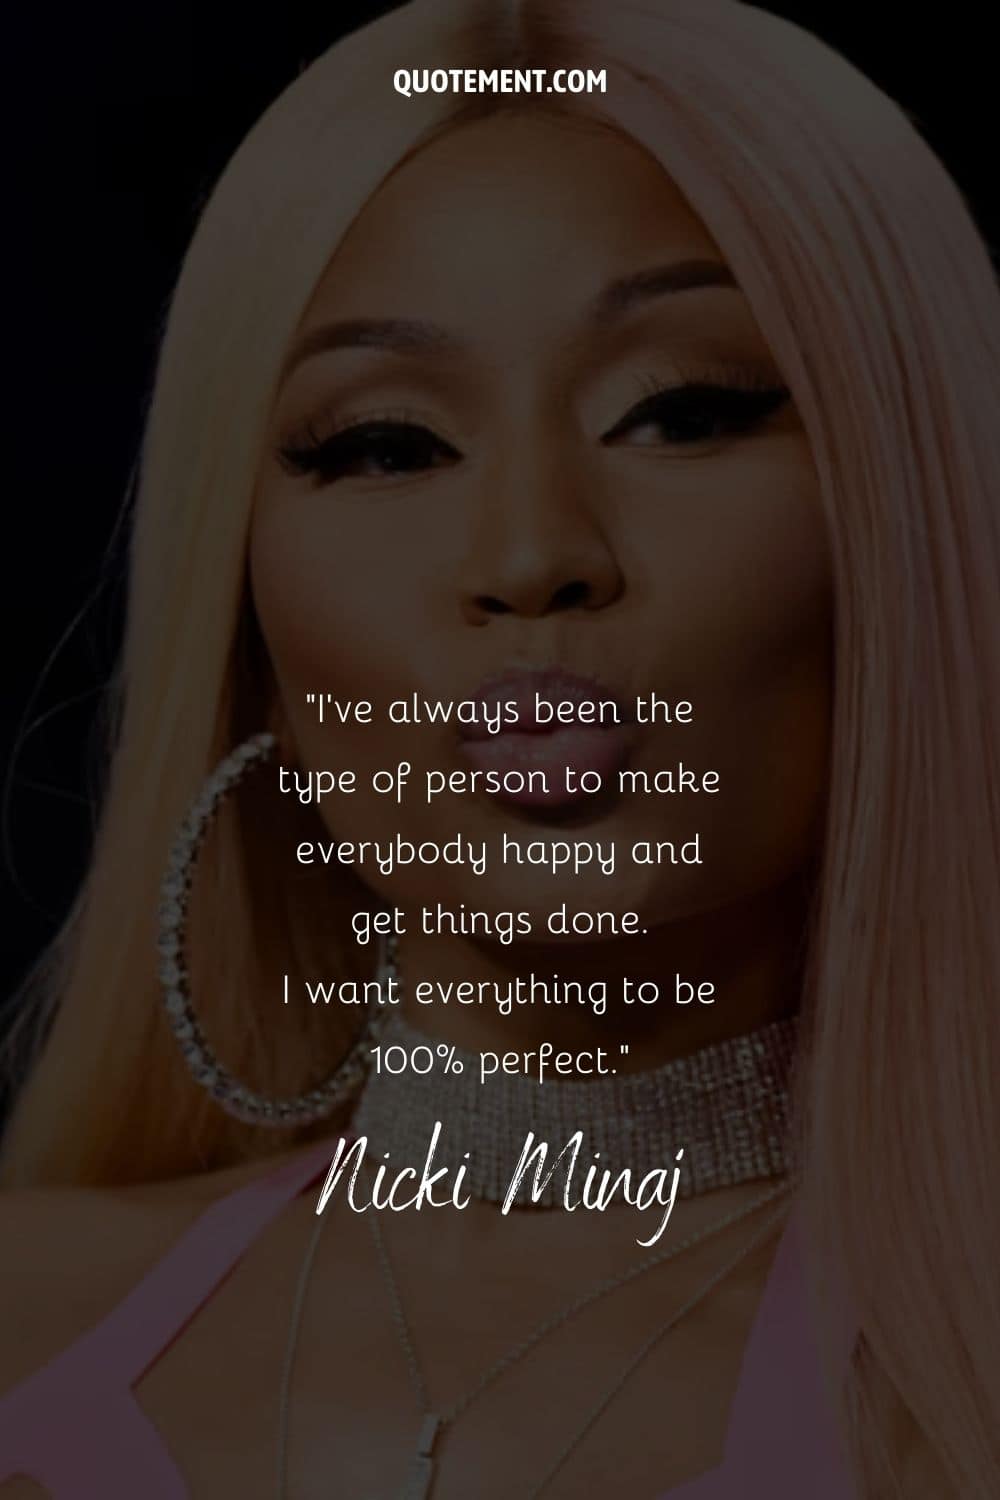 Quote by Nicki Minaj and her portrait in the background